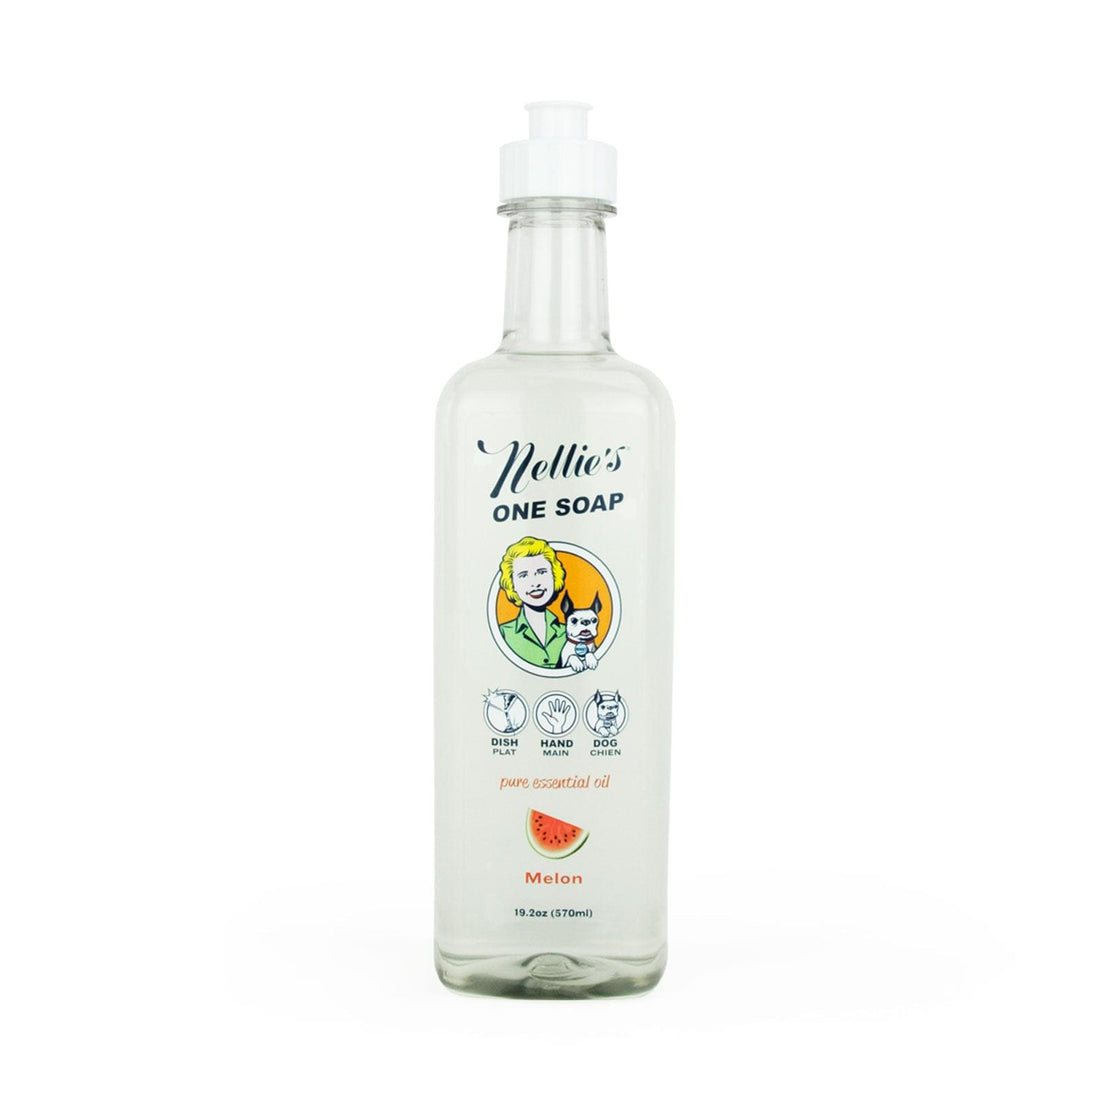 Eco-friendly all-in-one soap melon scent, in a 570ml squeeze top plastic bottle